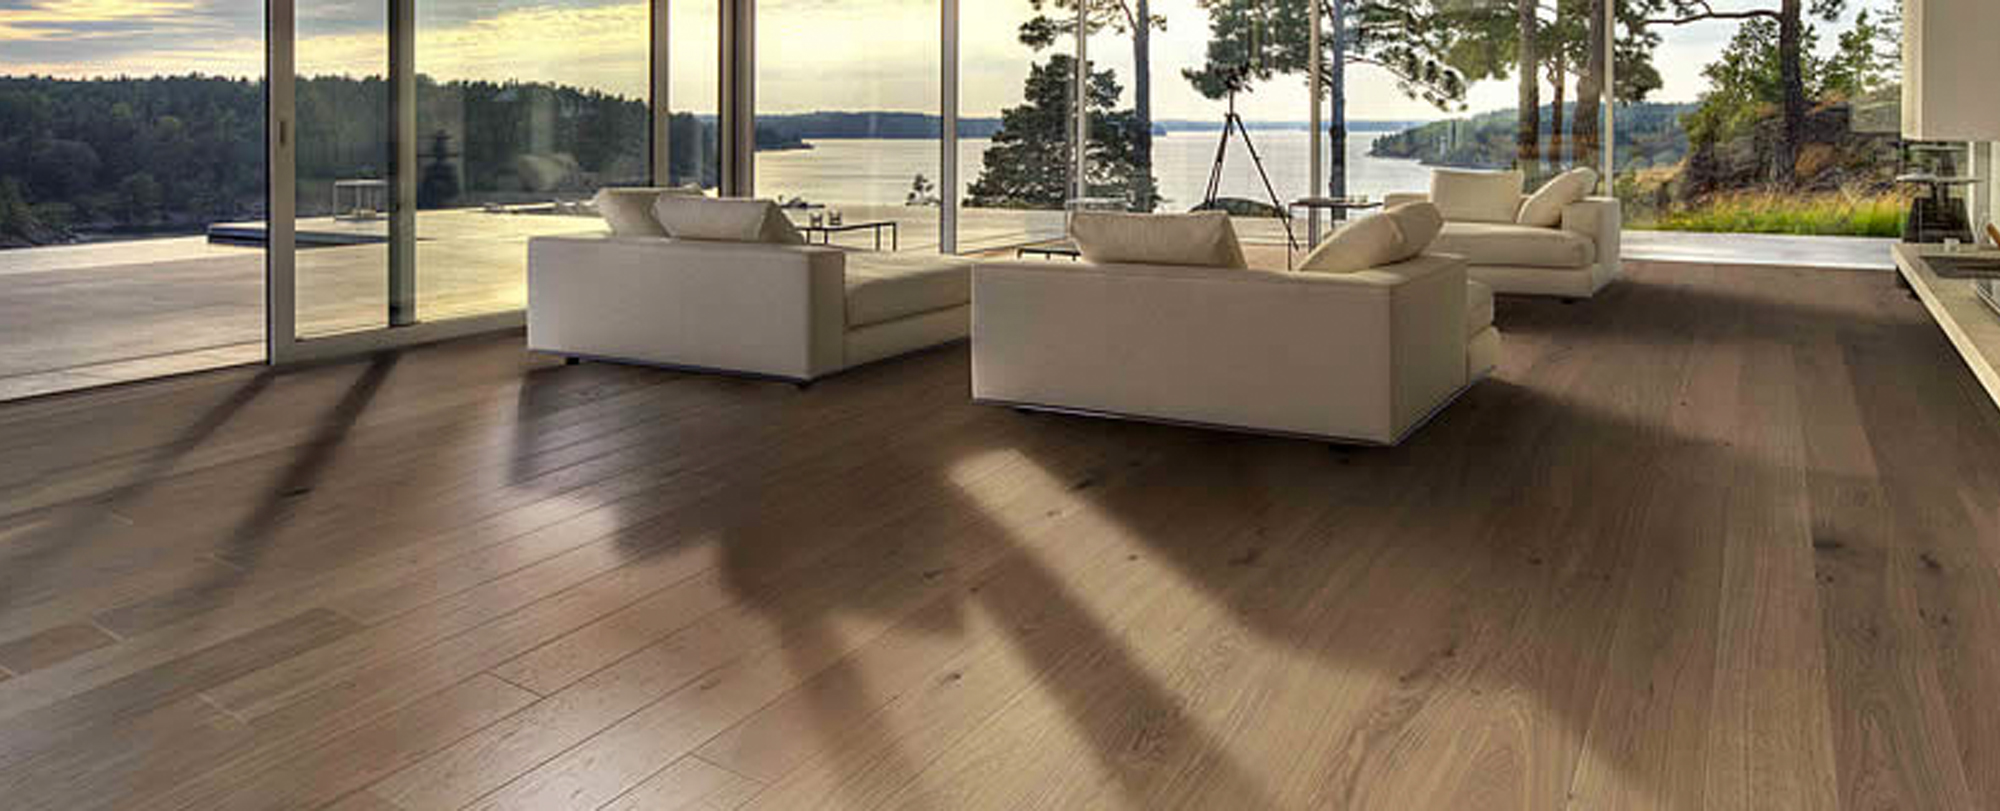 Wood Flooring Uk Hardwood Flooring Uk Wood Floor Specialist